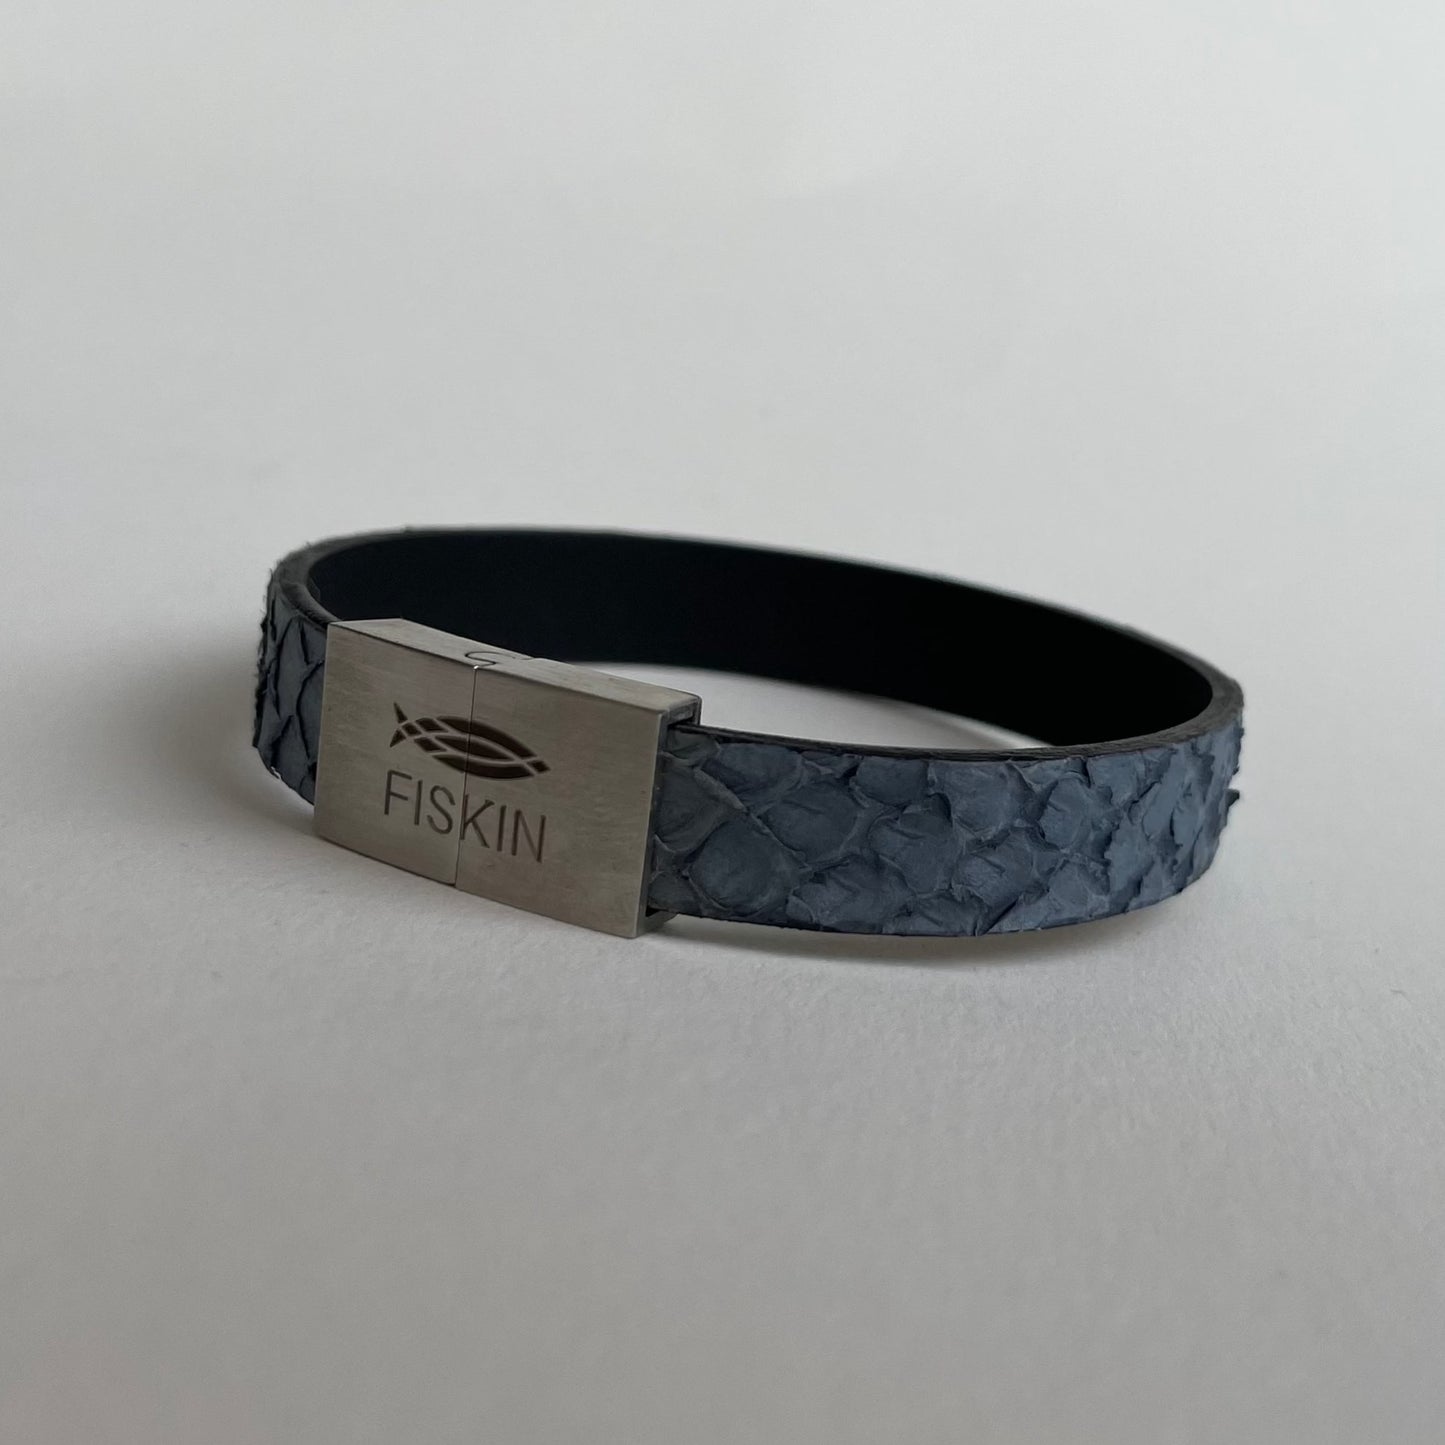 Fish leather bracelet, mystery from the deep sea